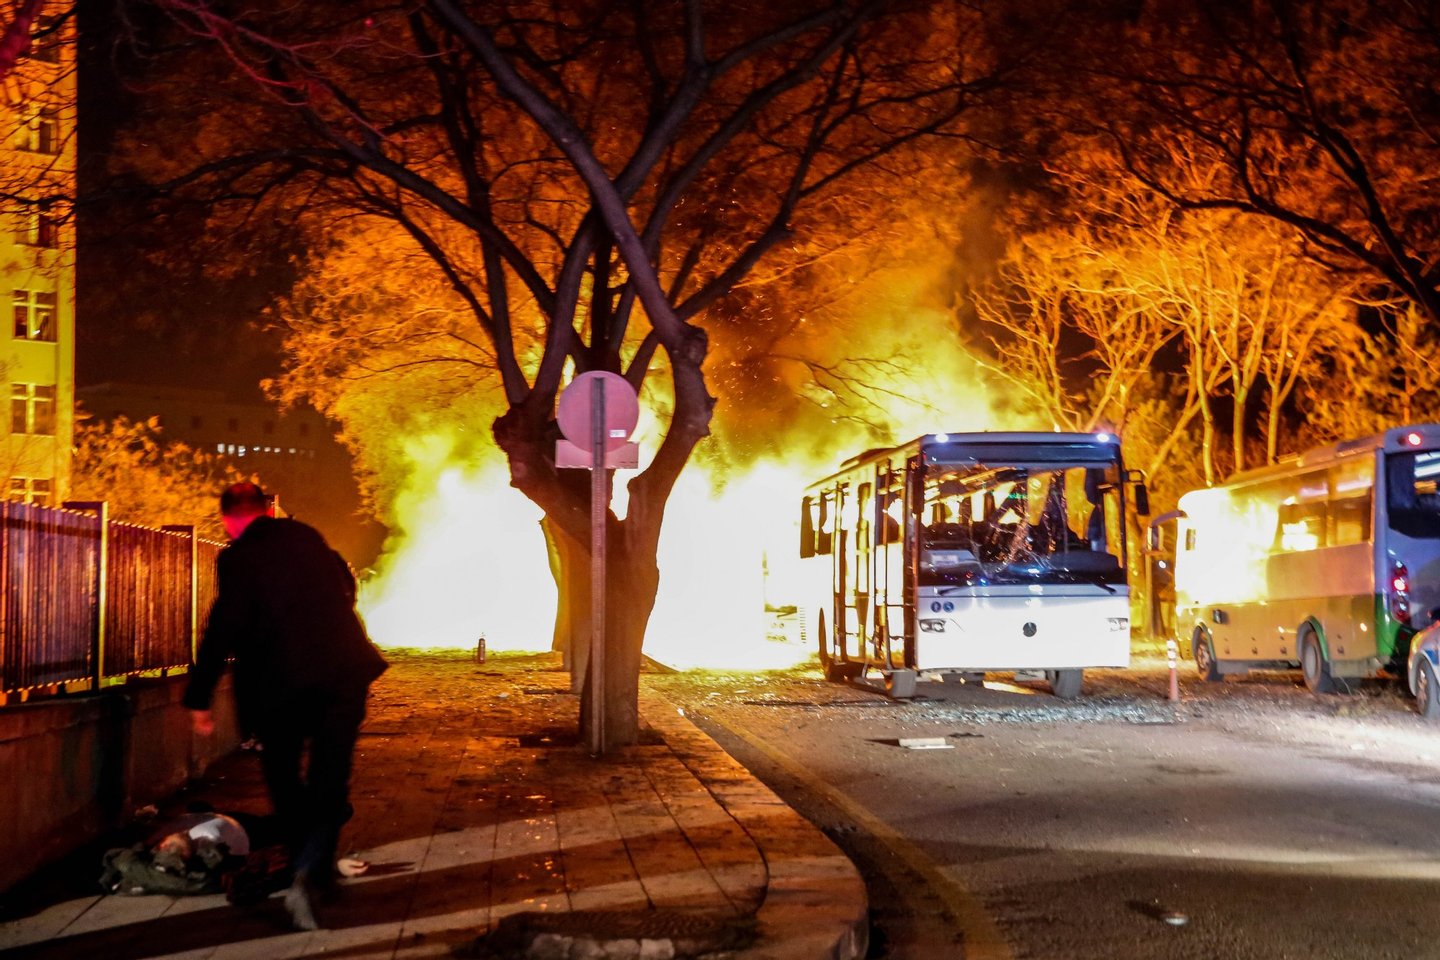 ANKARA, TURKEY - FEBRUARY 17: Turkish army service busses burn after an explosion on February 17, 2016 in Ankara, Turkey. 21 people are believed to have been killed and at least 61 are said to be wounded according to the city's governor Mehmet Kiliclar in what appeared to have been a car bomb attack on a vehicle carrying military personnel in the Turkish capital. (Photo by Defne Karadeniz/Getty Images)